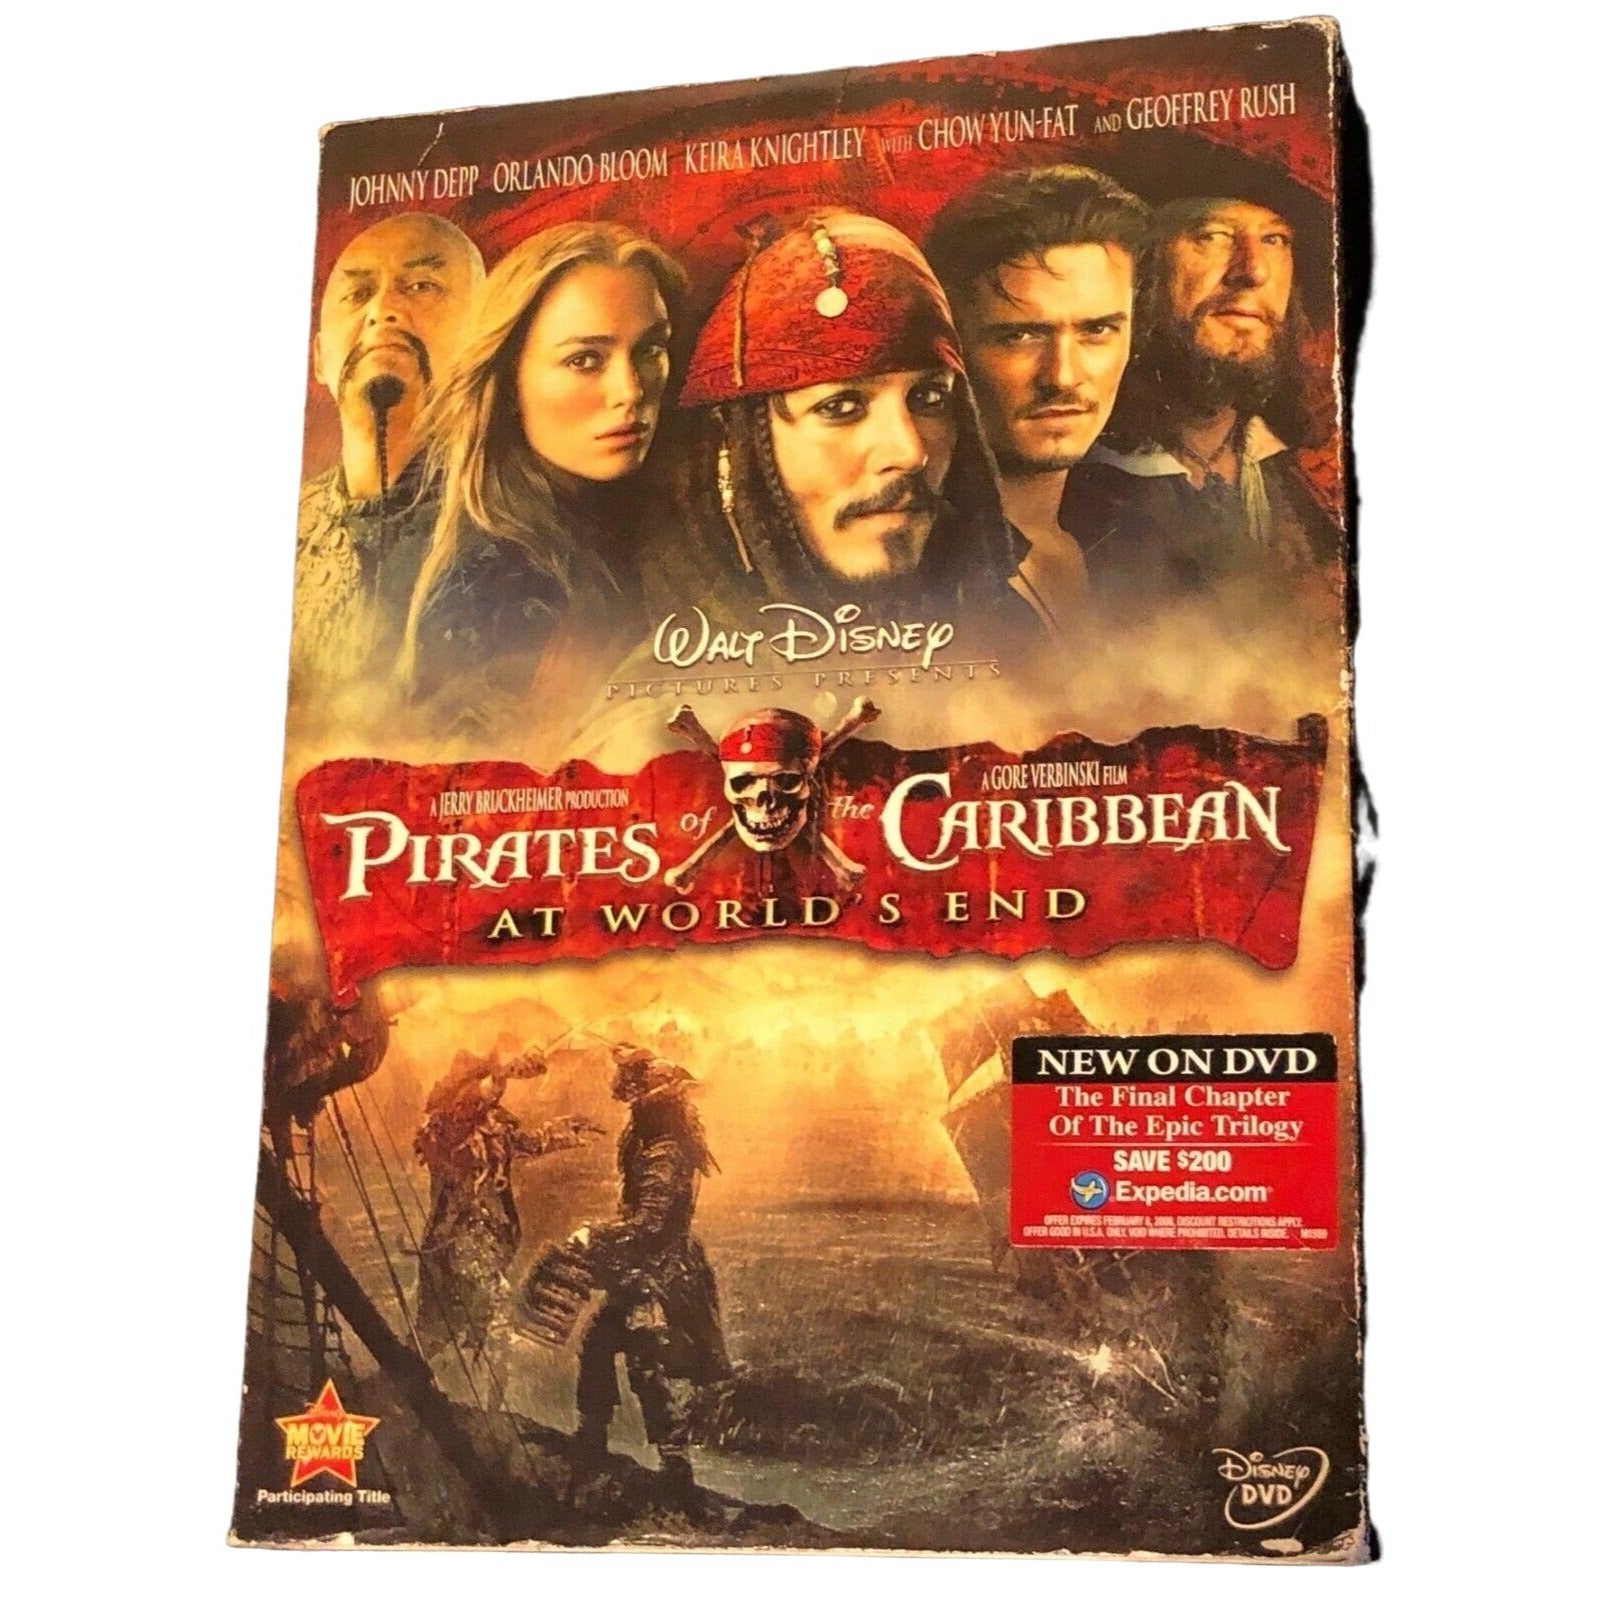 Pirates of the Caribebean: At World's End (DVD, 2007)